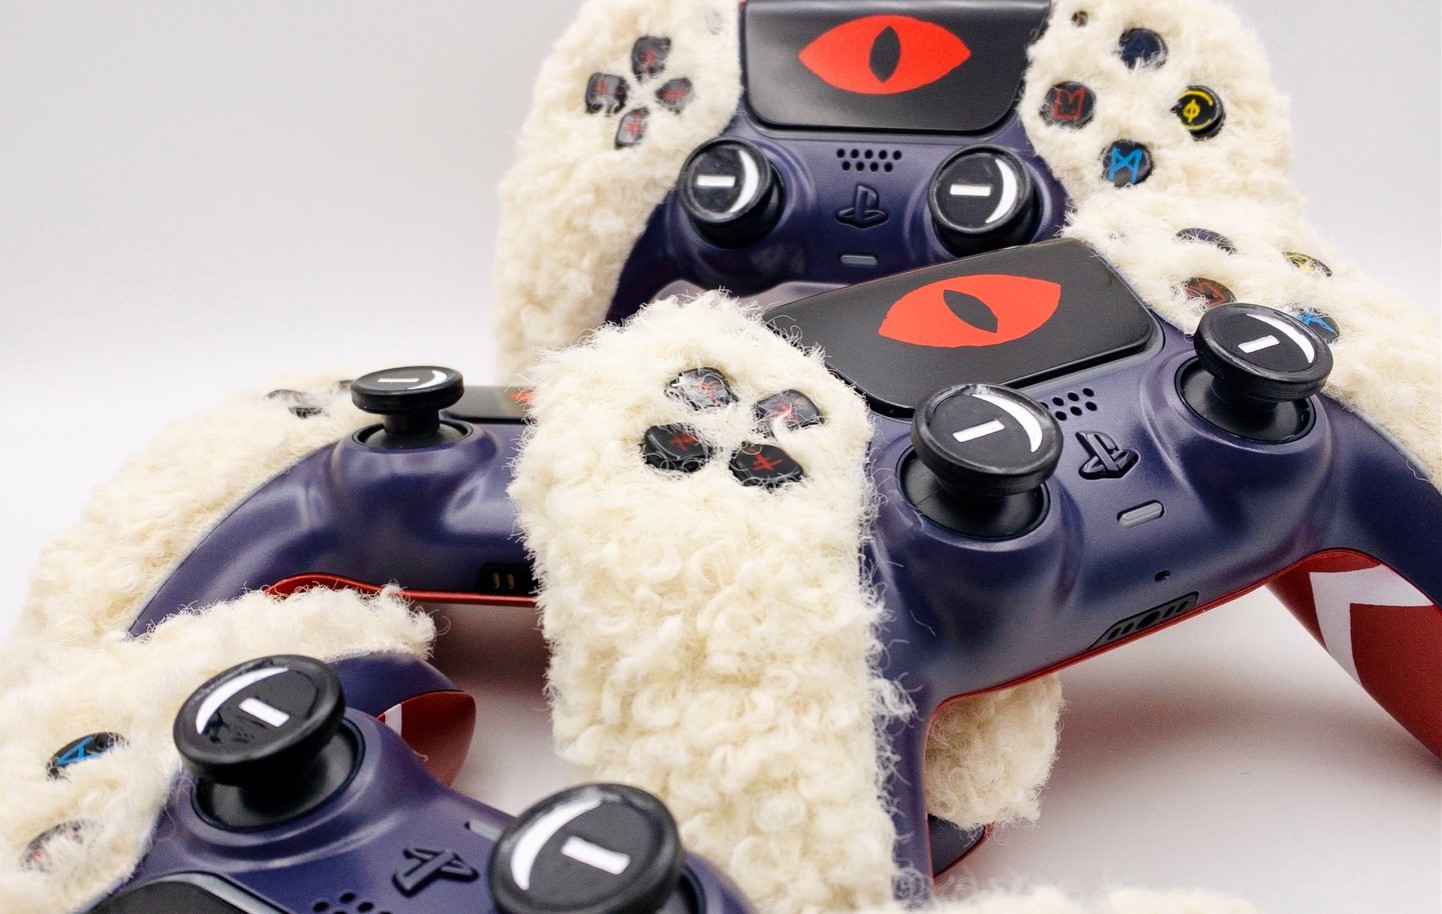 LAST CHANCE! Want an Downloaded Cult Lamb – We one controller? of to the Digitally give away! custom have awesome